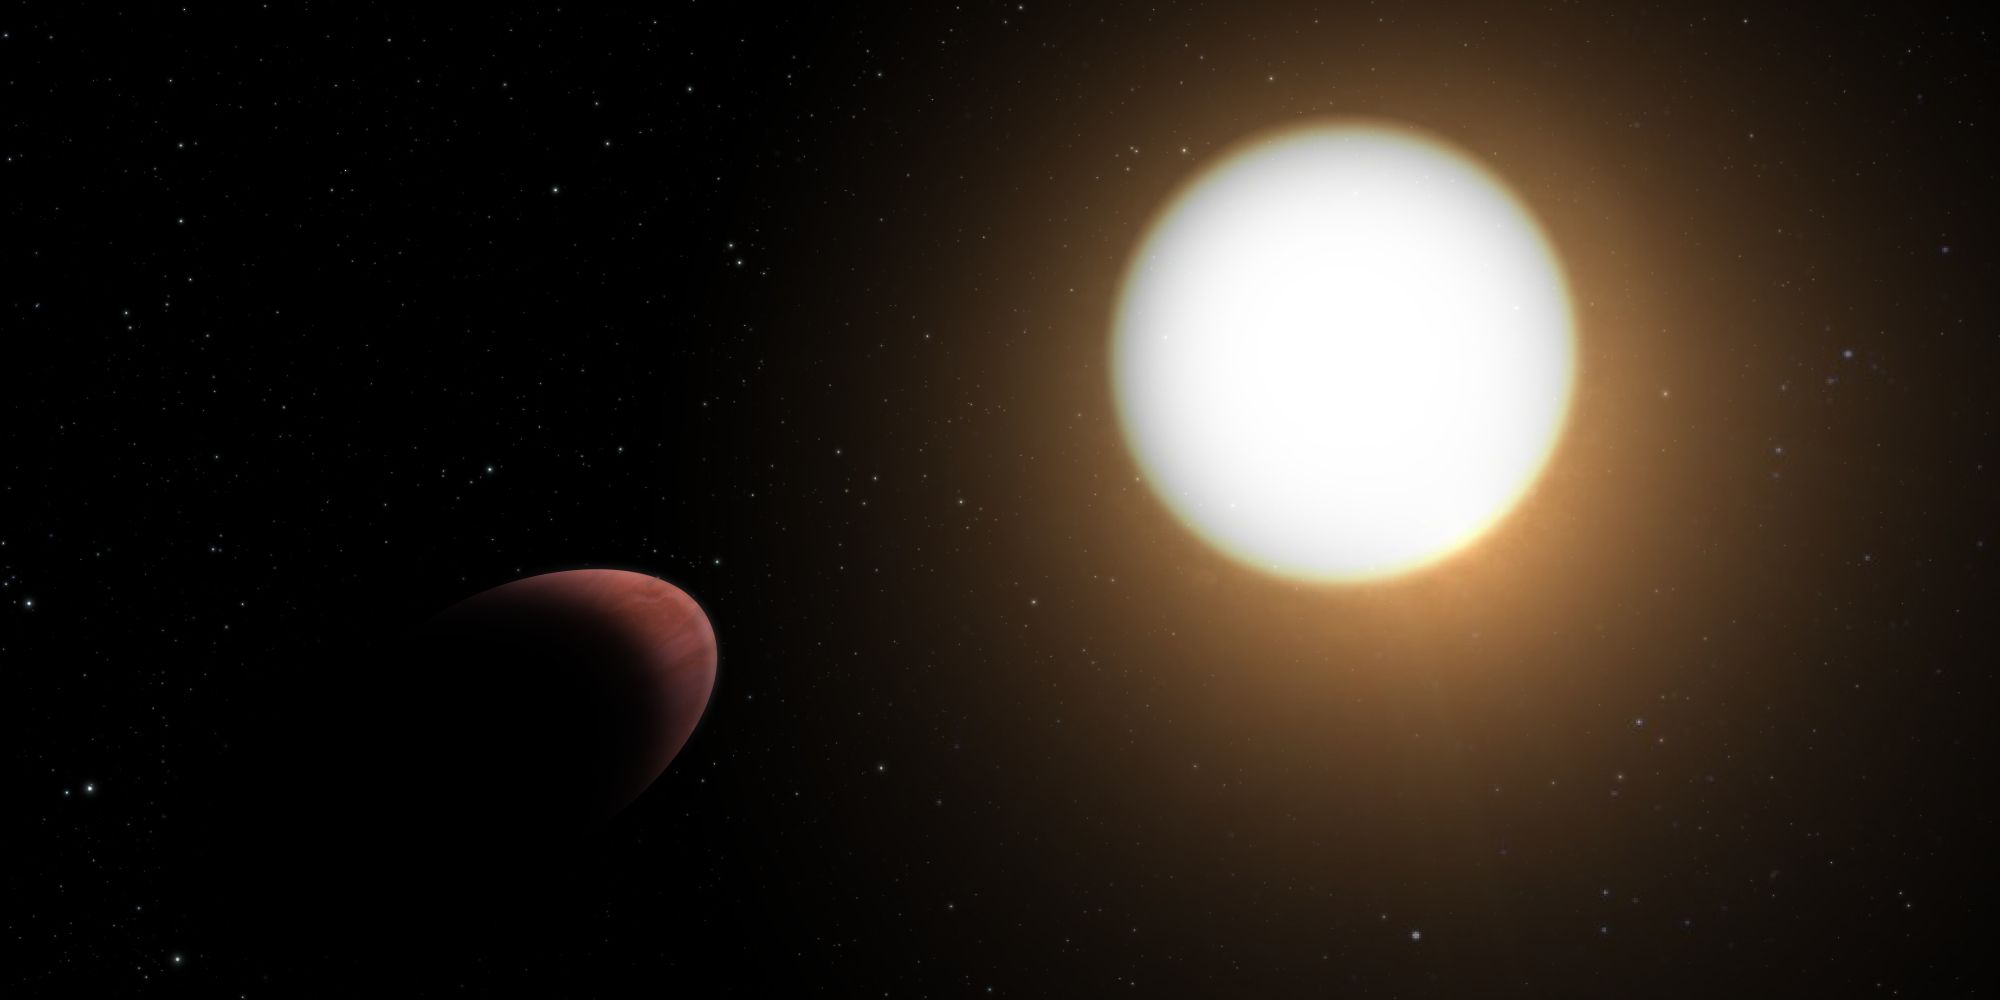 Artist render of the exoplanet WASP-103b